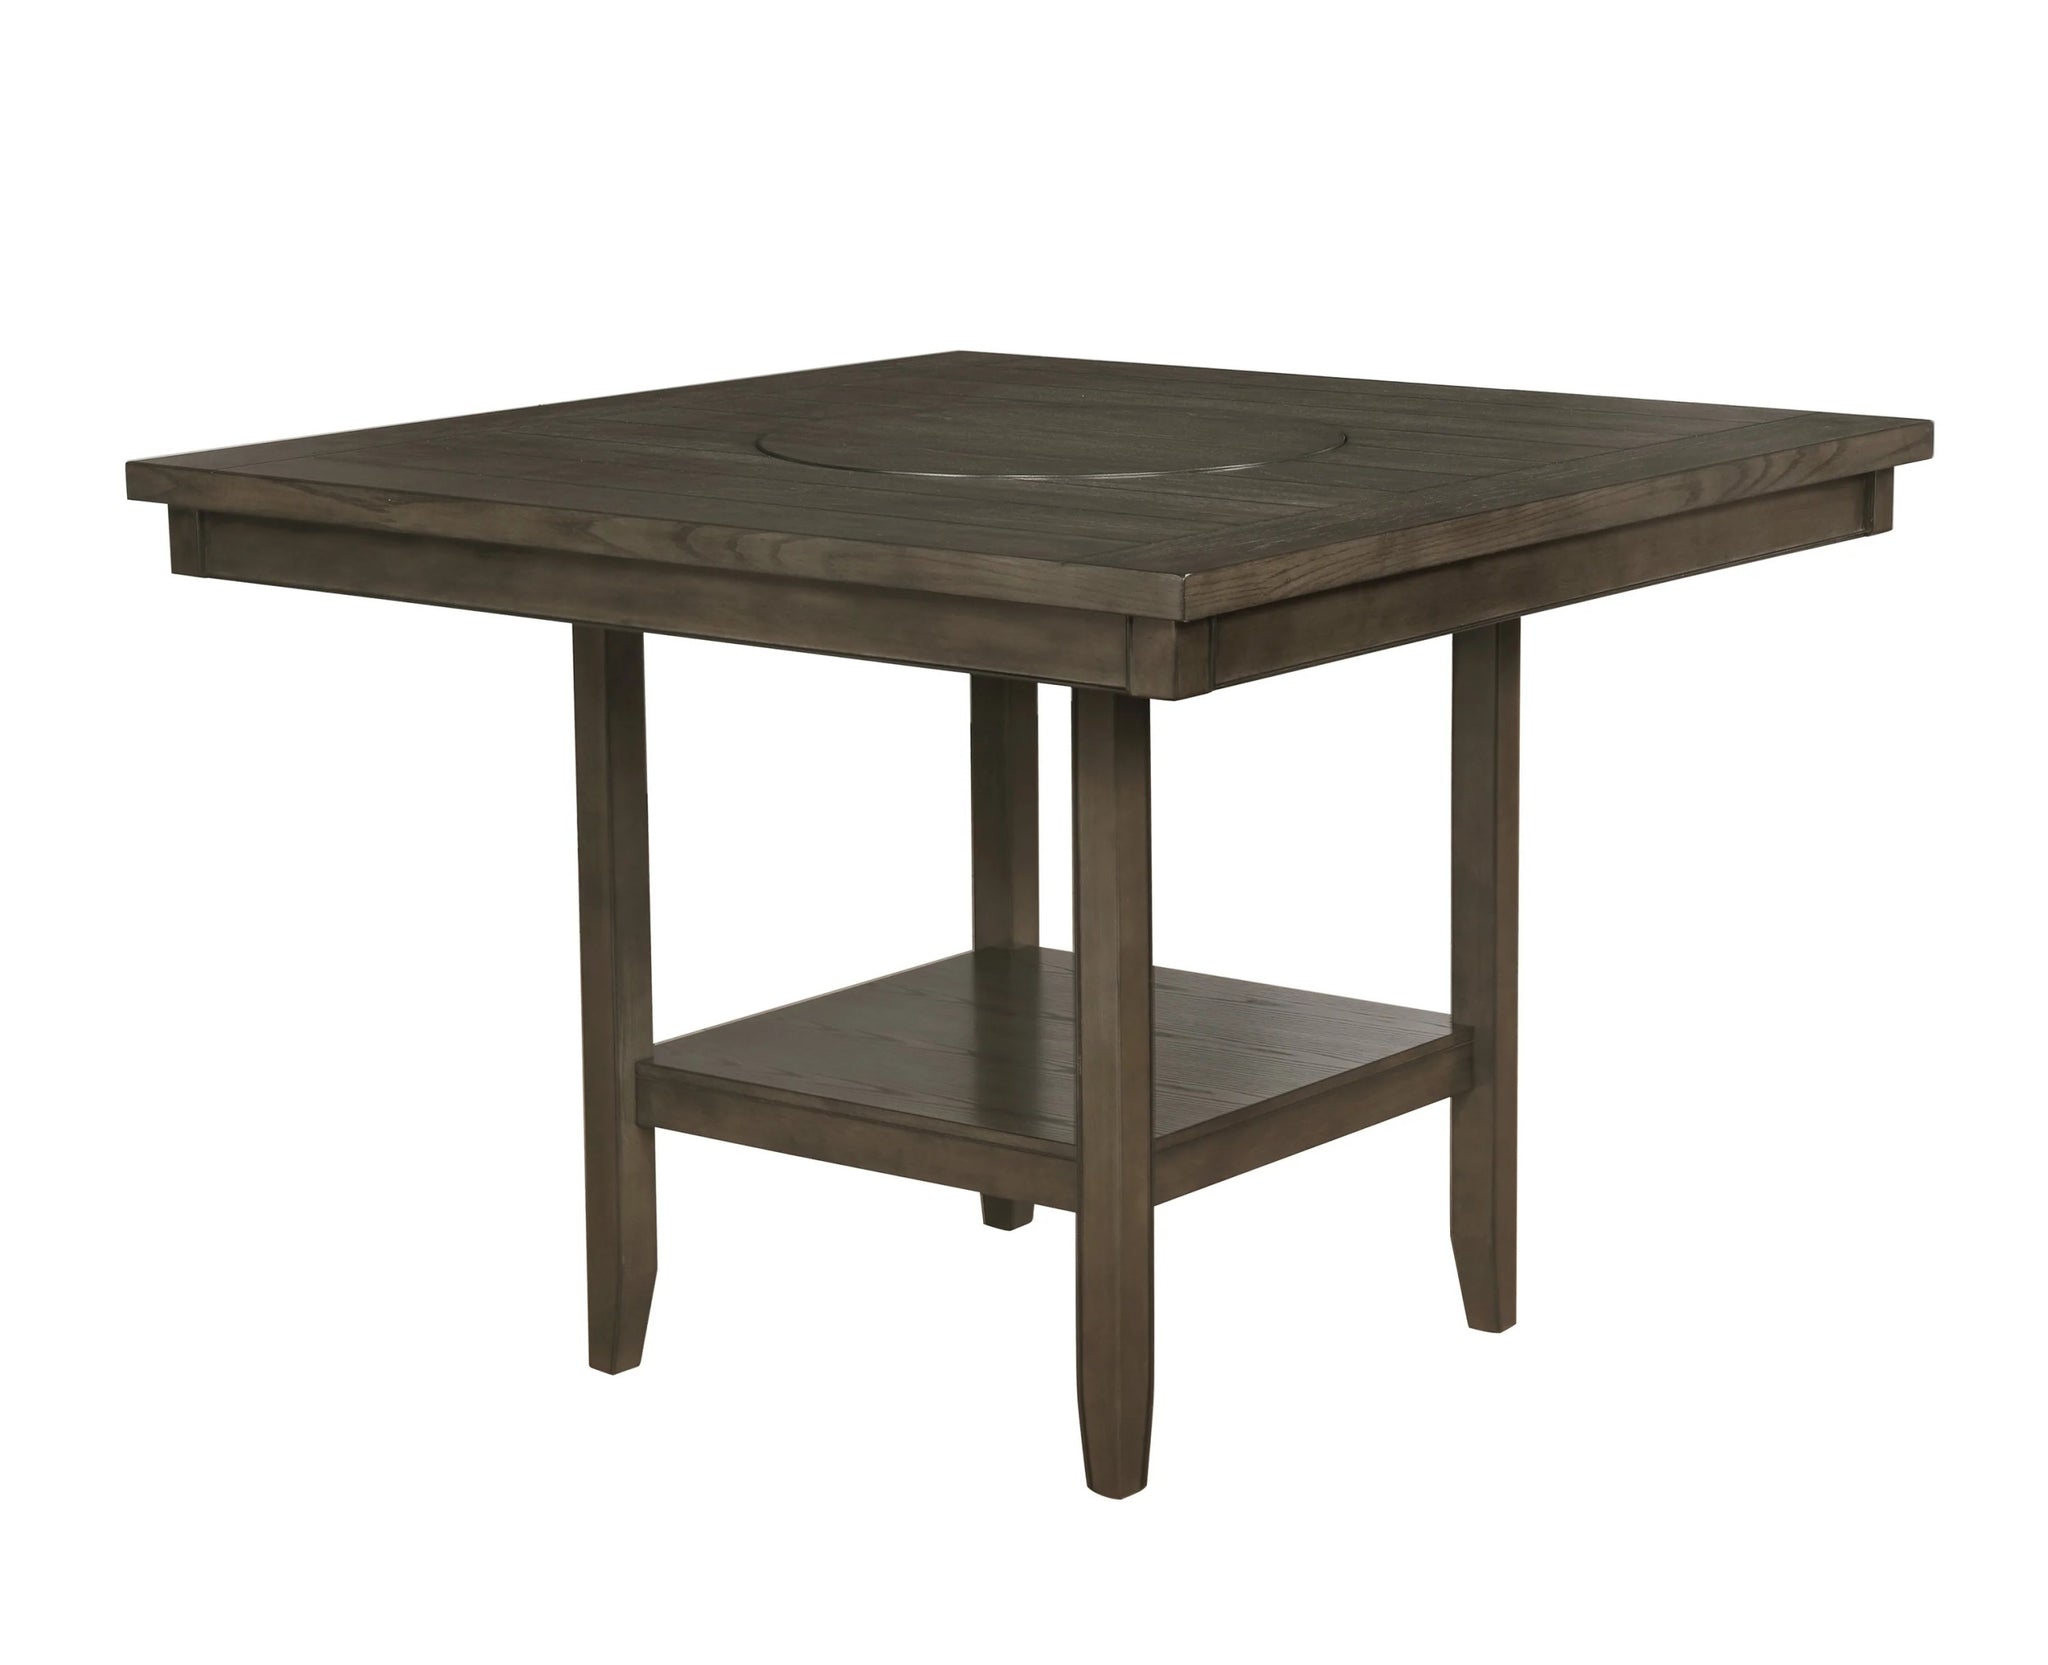 1pc Contemporary Transitional Counter Height Dining gray-dining